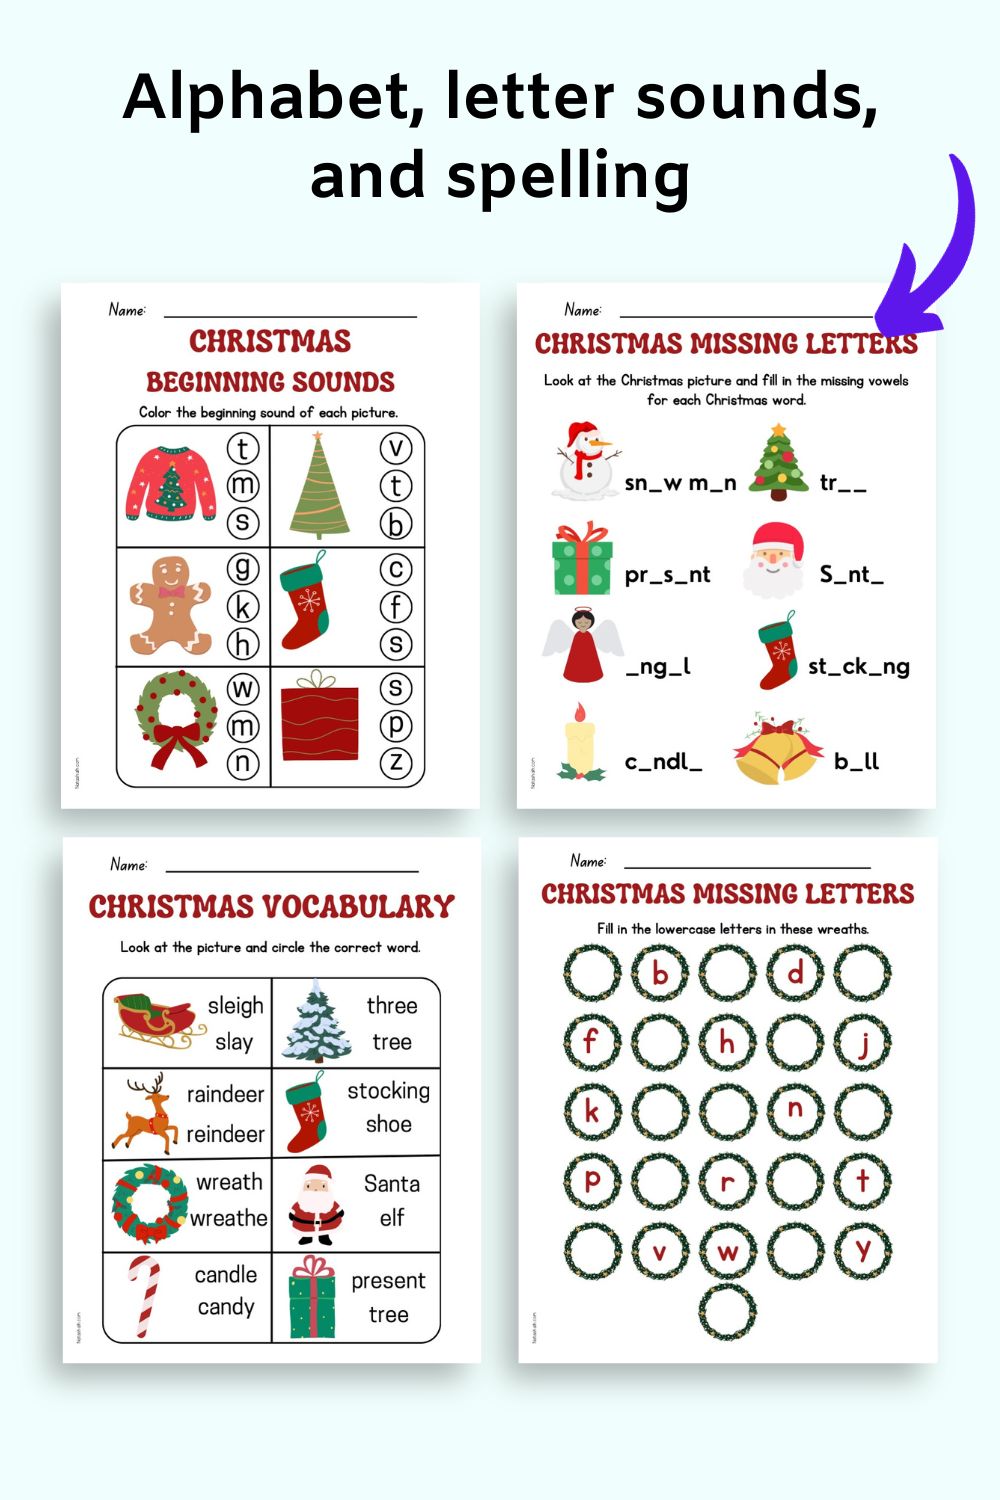 text "alphabet, letter sounds, and spelling" with a preview of four activity pages